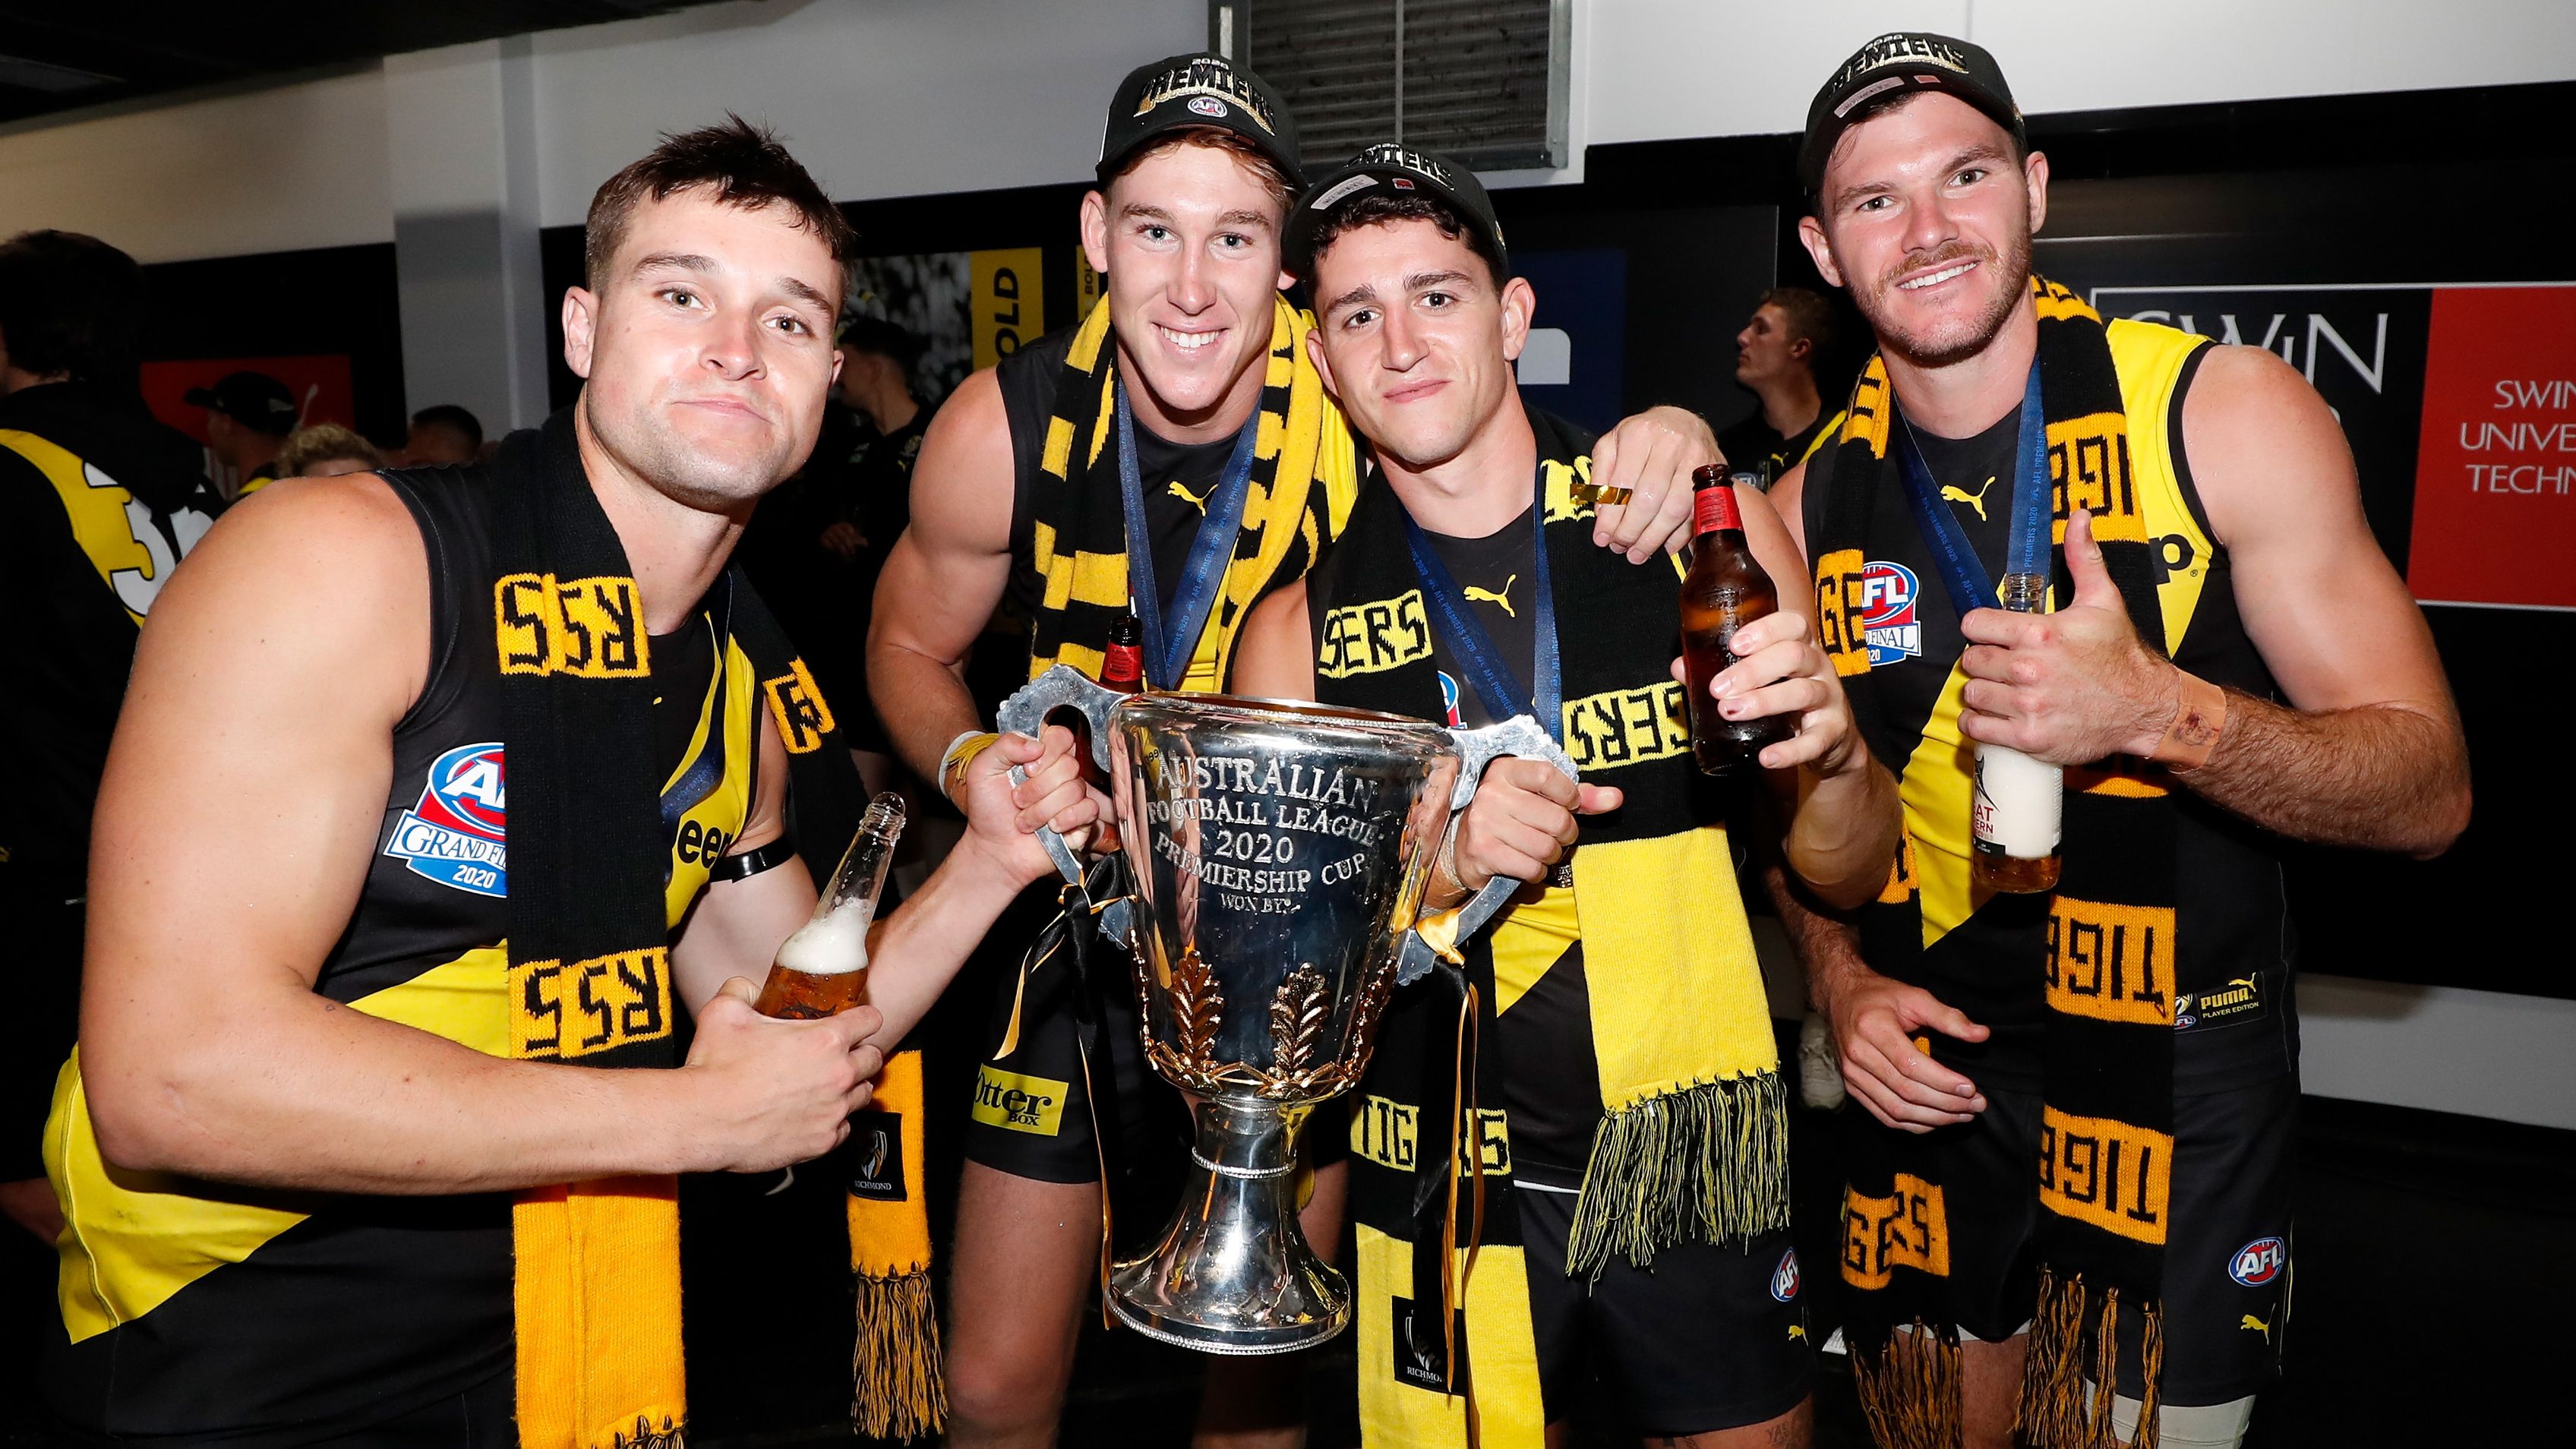 Jayden Short, Tom J. Lynch, Jason Castagna and Kamdyn McIntosh of the Tigers celebrate during the 2020 Toyota AFL Grand Final match between the Richmond Tigers and the Geelong Cats at The Gabba on October 24, 2020 in Brisbane, Australia.